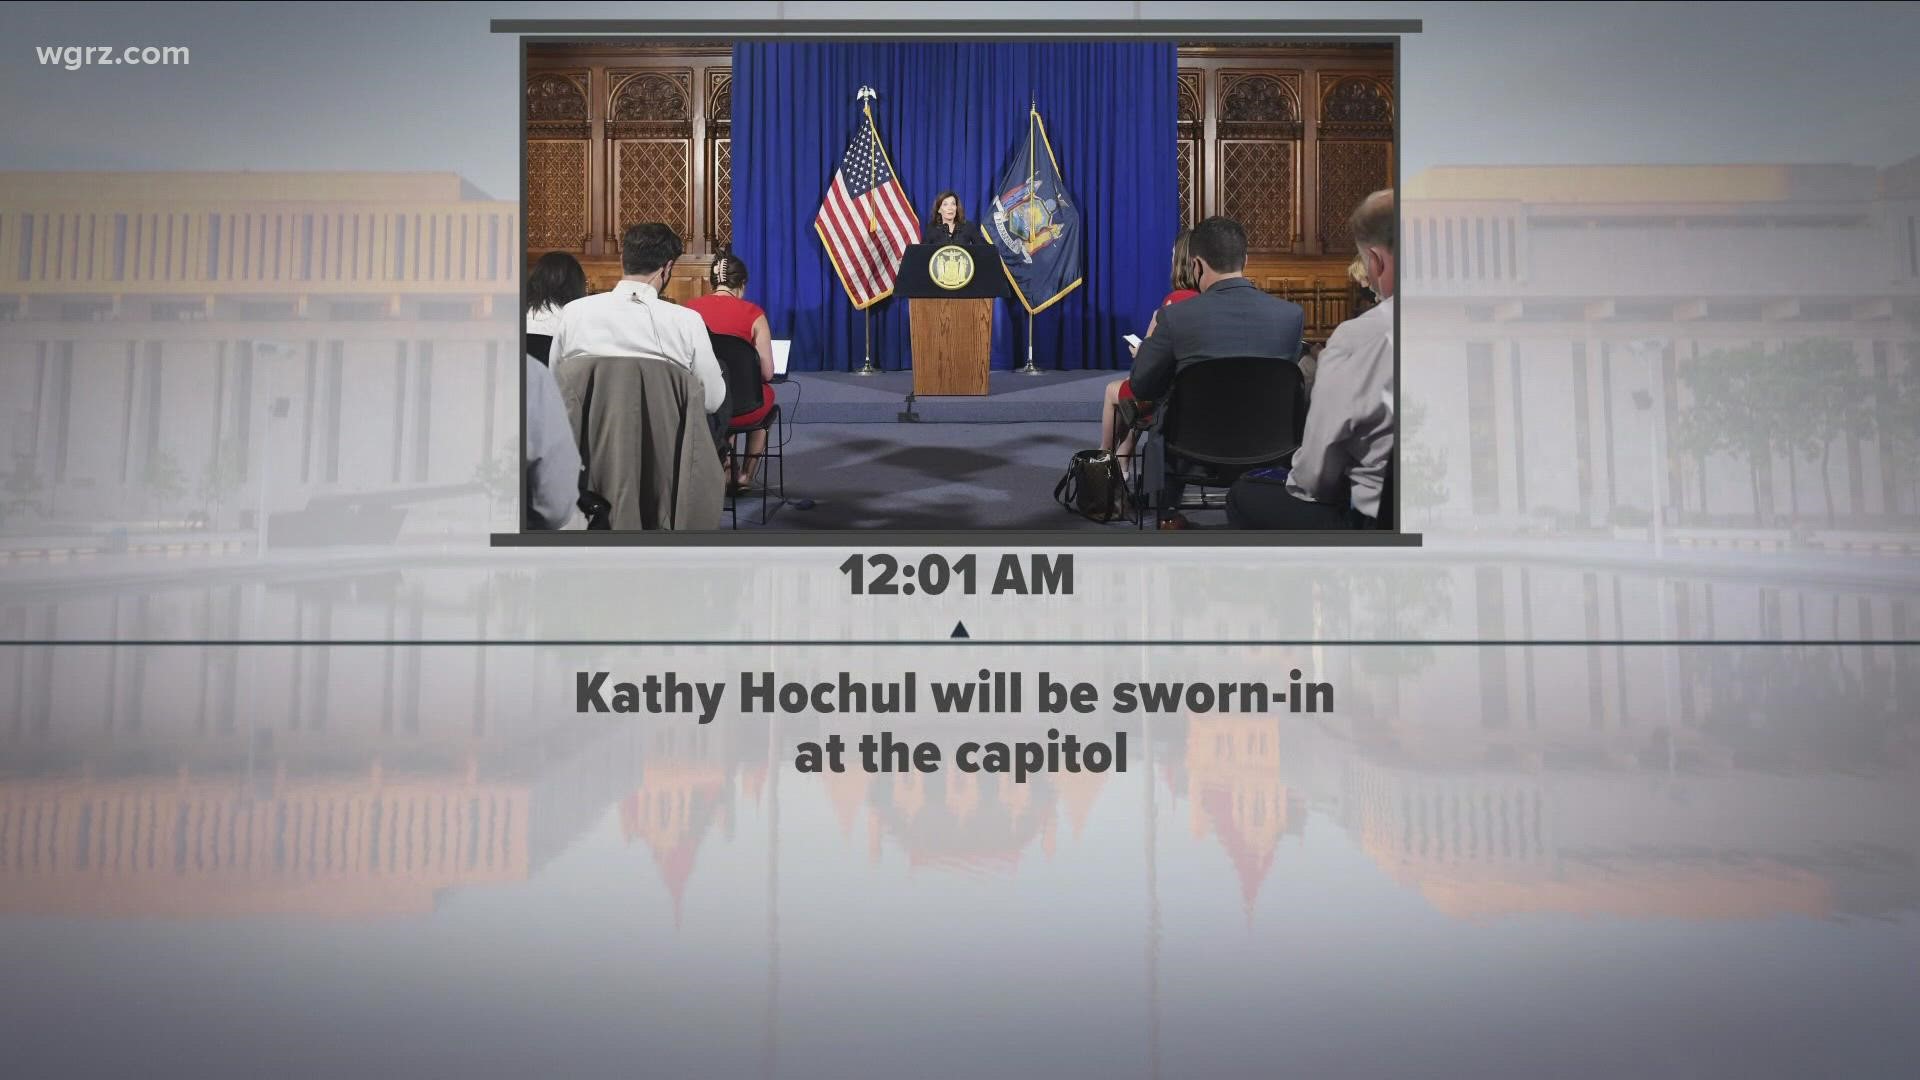 Lt. Governor Kathy Hochul will officially become the 57th governor of New York State and the first female to lead the state.